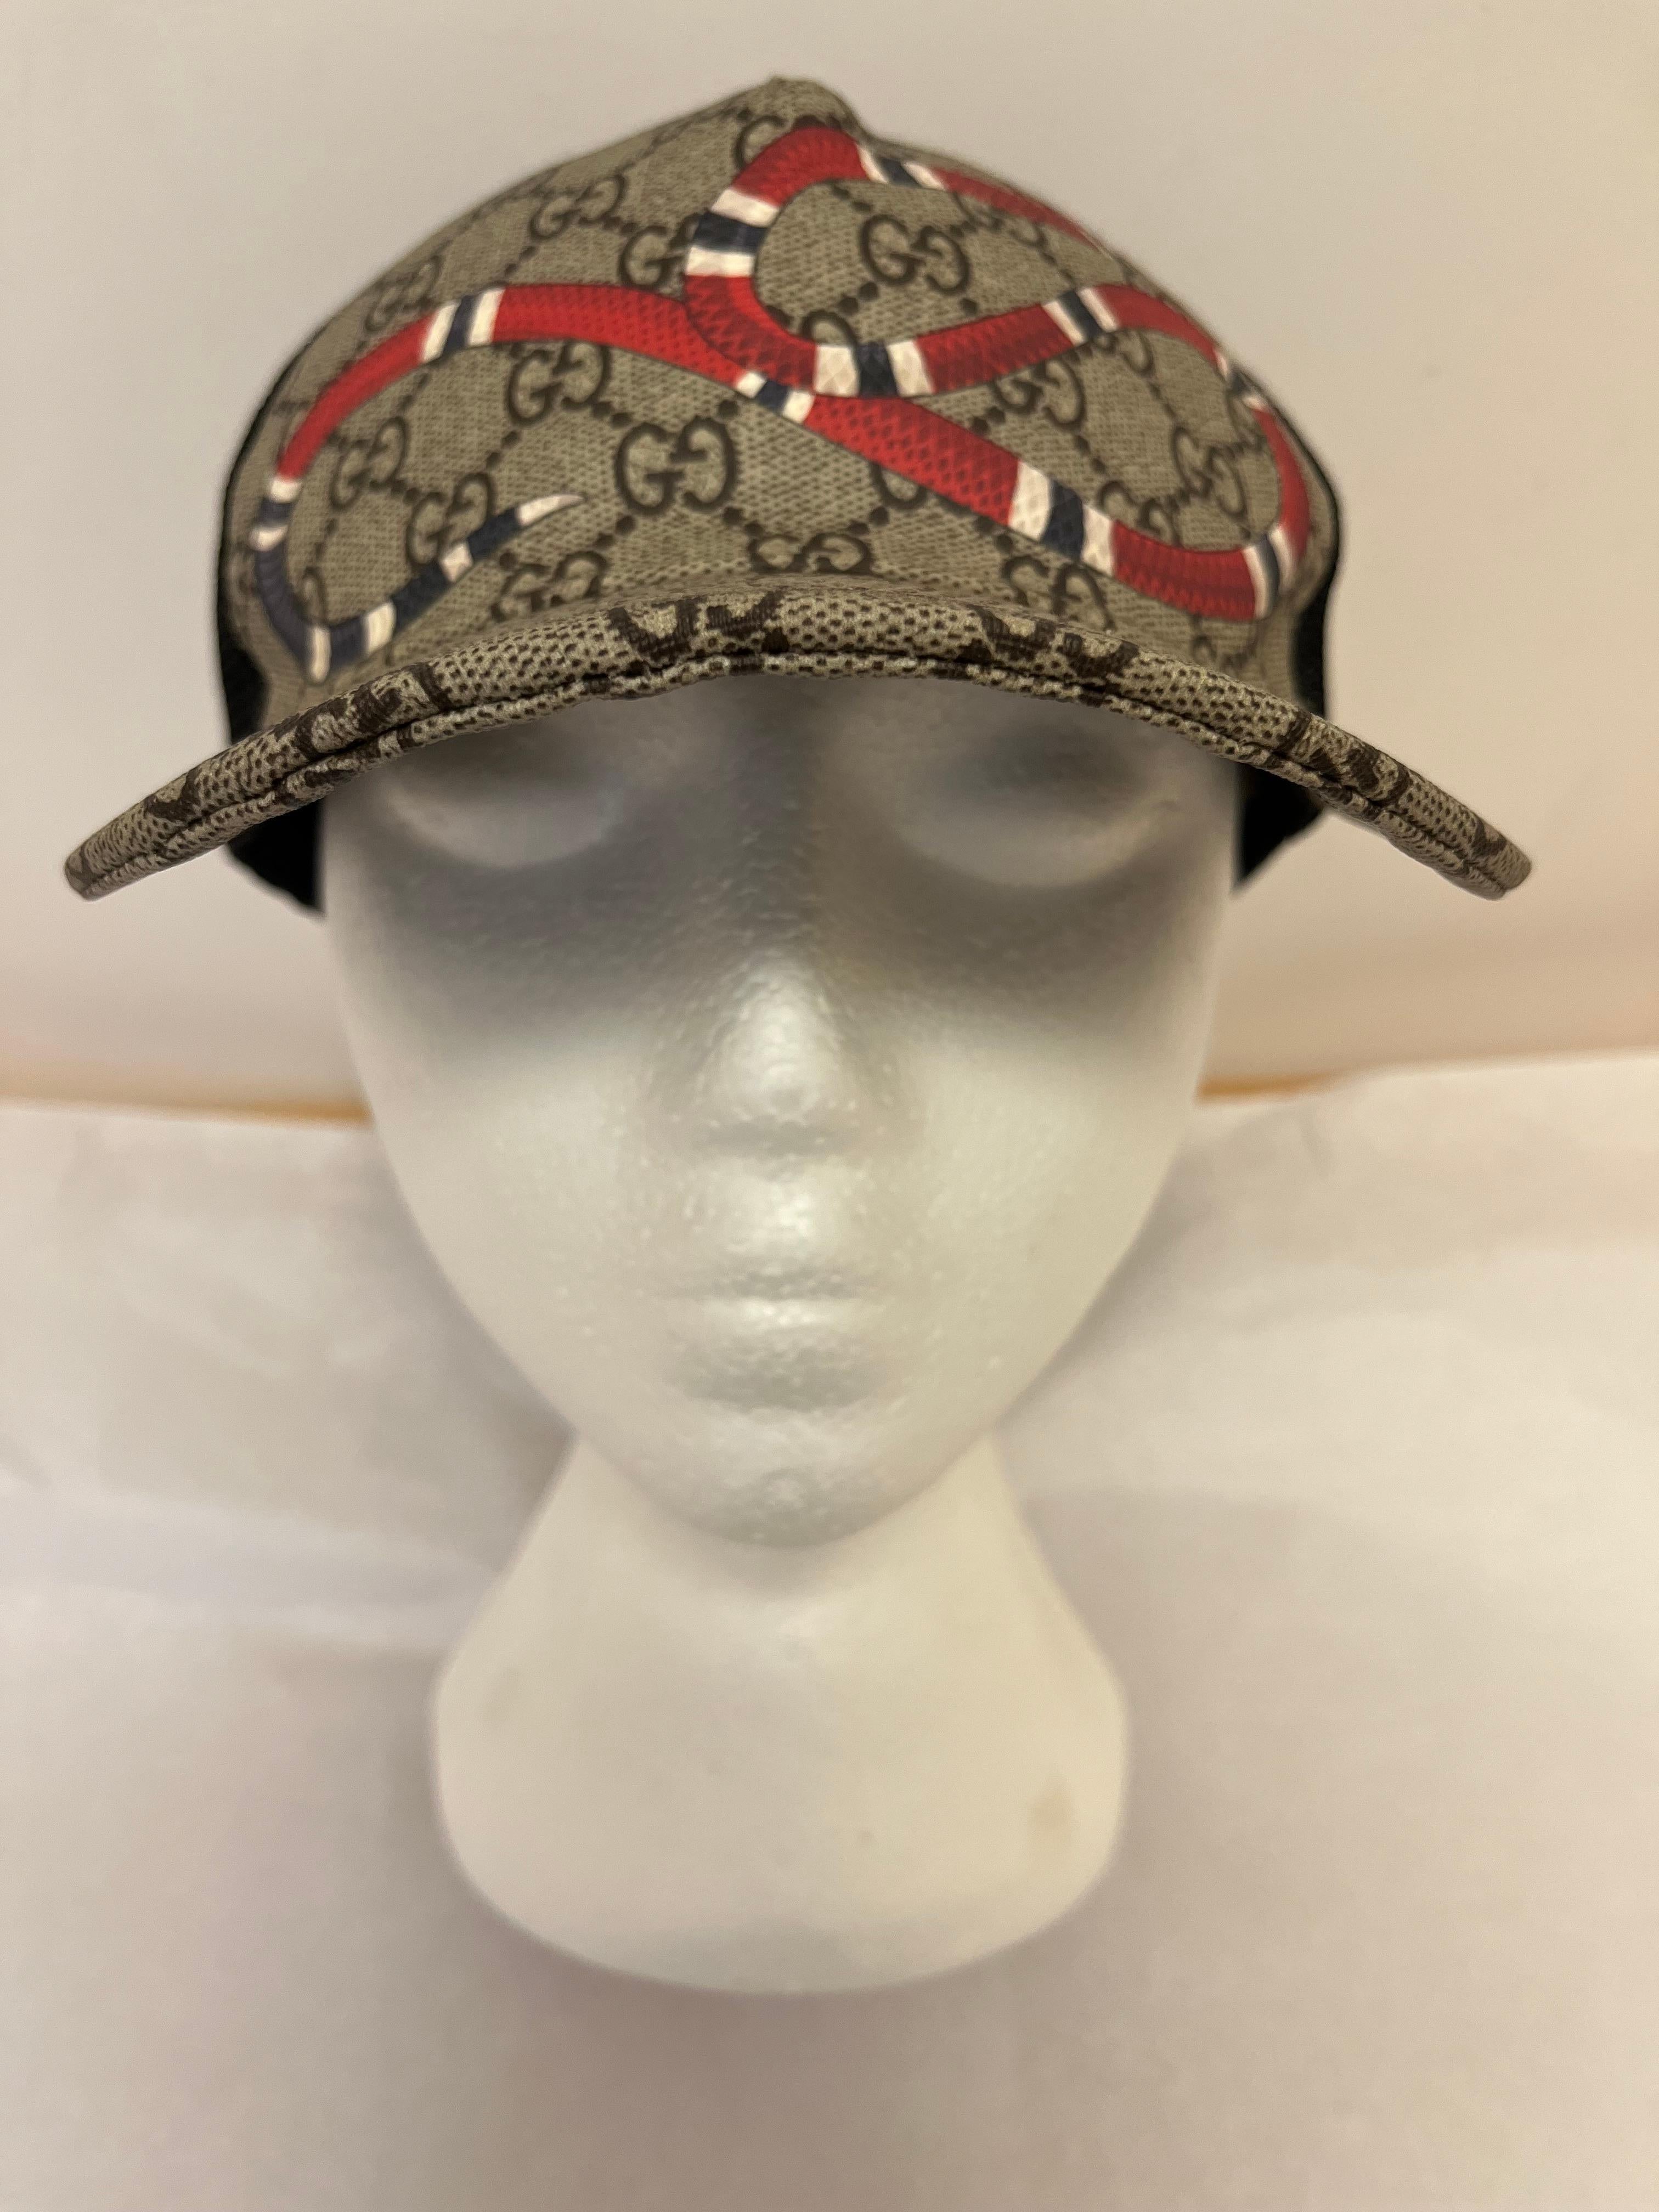 Any baseball fan would love this Gucci GG Monogram Supreme Kingsnake Baseball Cap. 
This baseball cap is made of 50% cotton and 50% viscose with the iconic Gucci GG monogram motif. 
The signature Kingsnake image is one of the many specialty caps